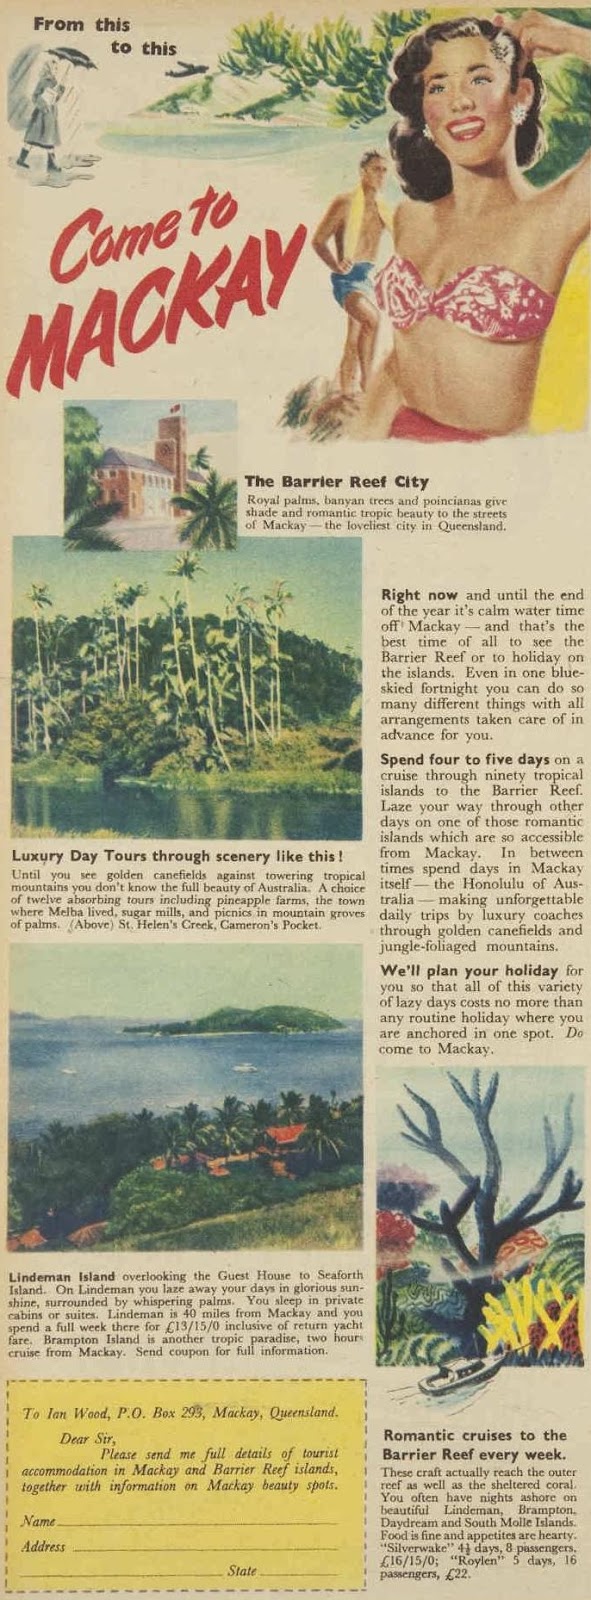 vintage 1950s ad for travel to mackay, QLD